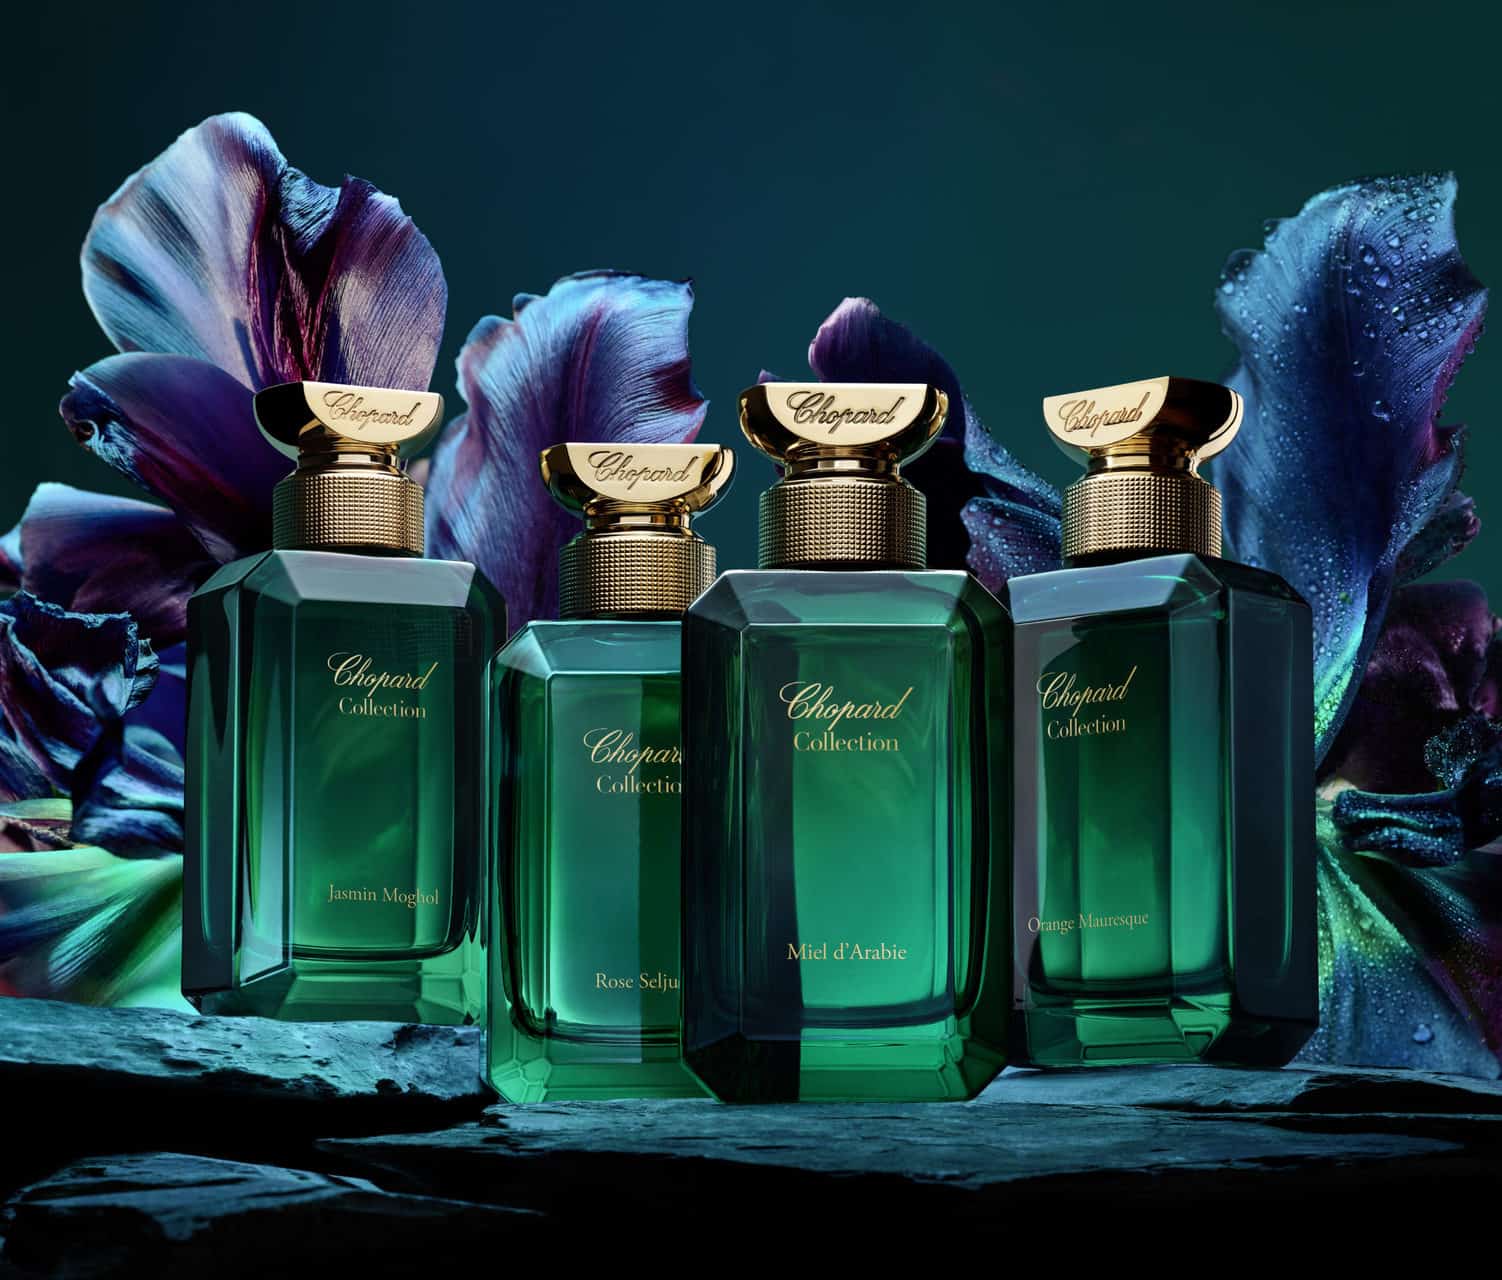 The Chopard New High Perfumery Collection